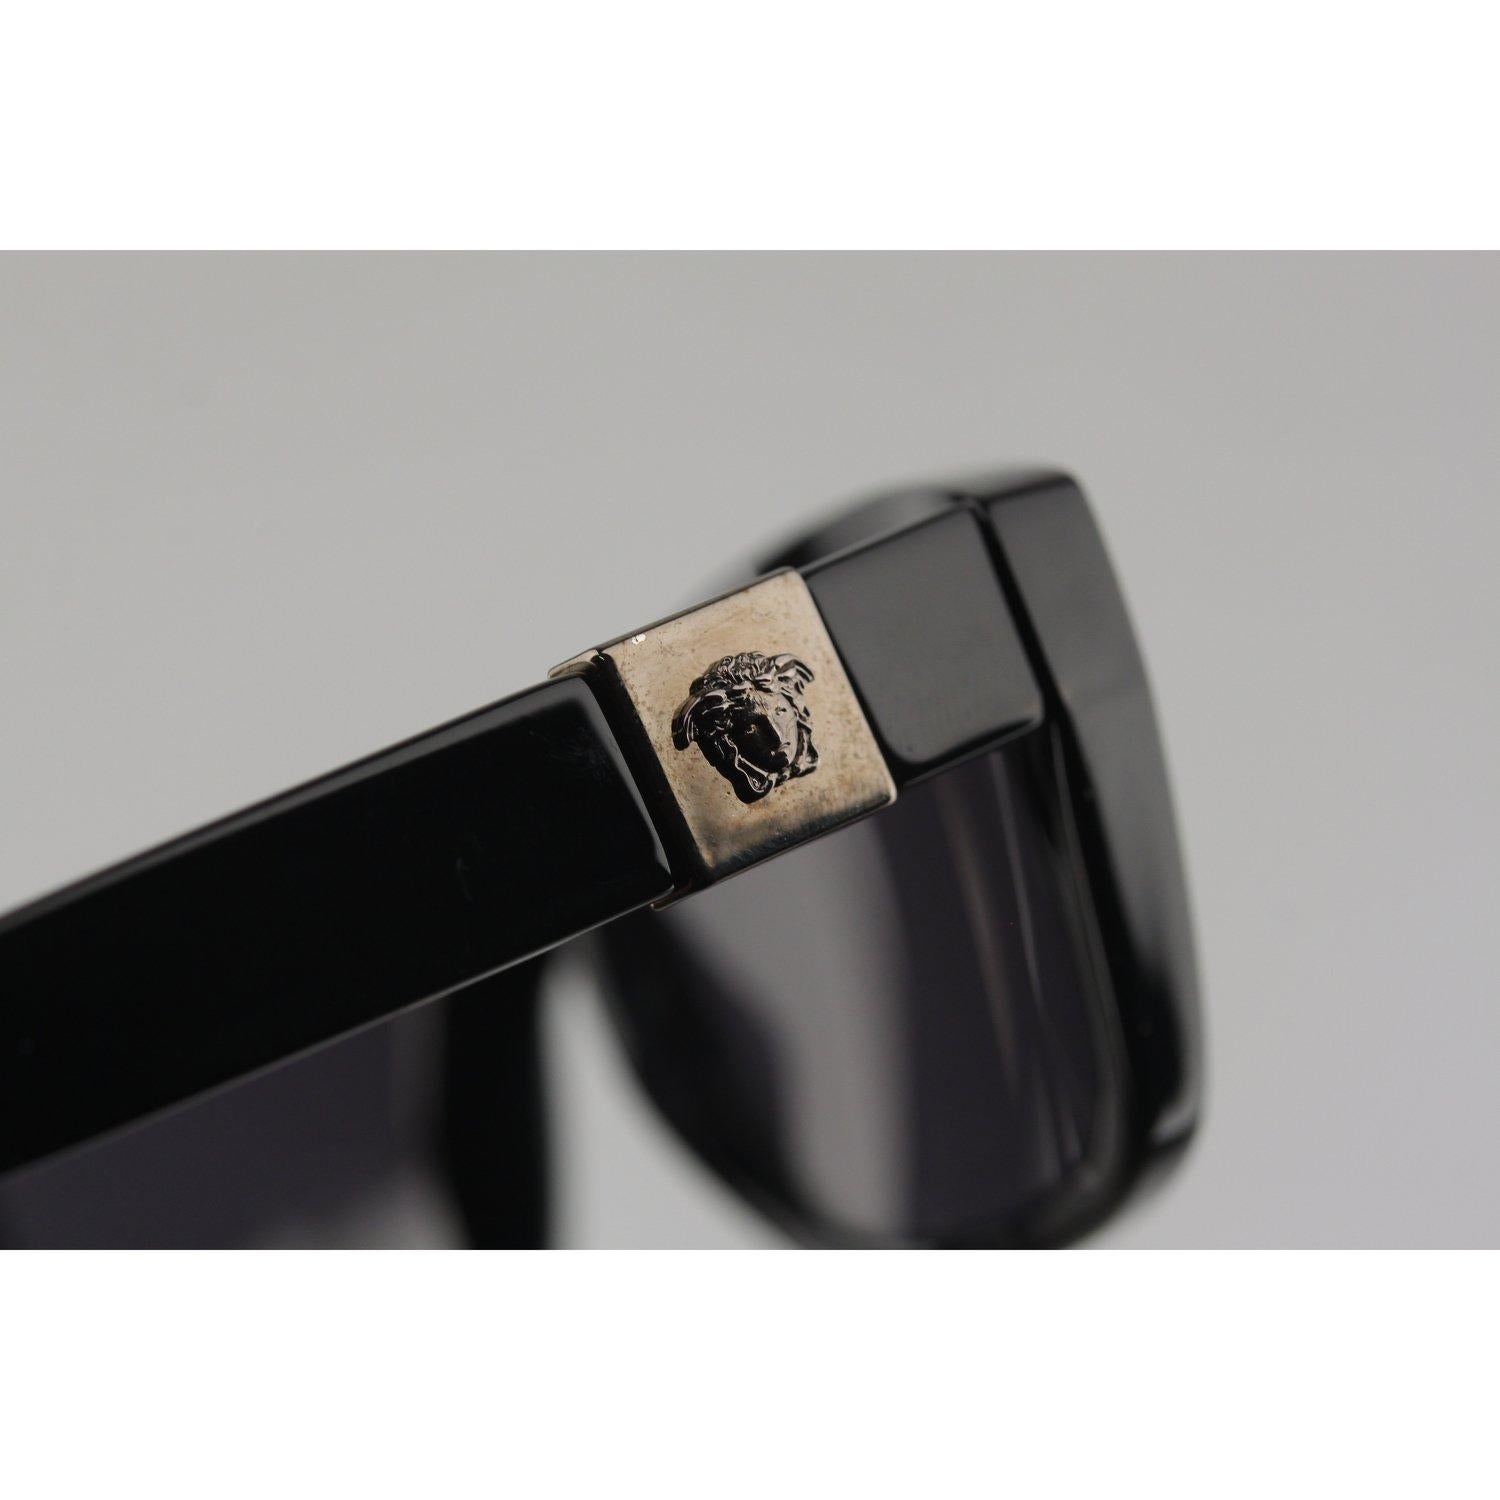 Gianni Versace Vintage Black Sunglasses Mod. 291/A Col 852 New Old Stock 1